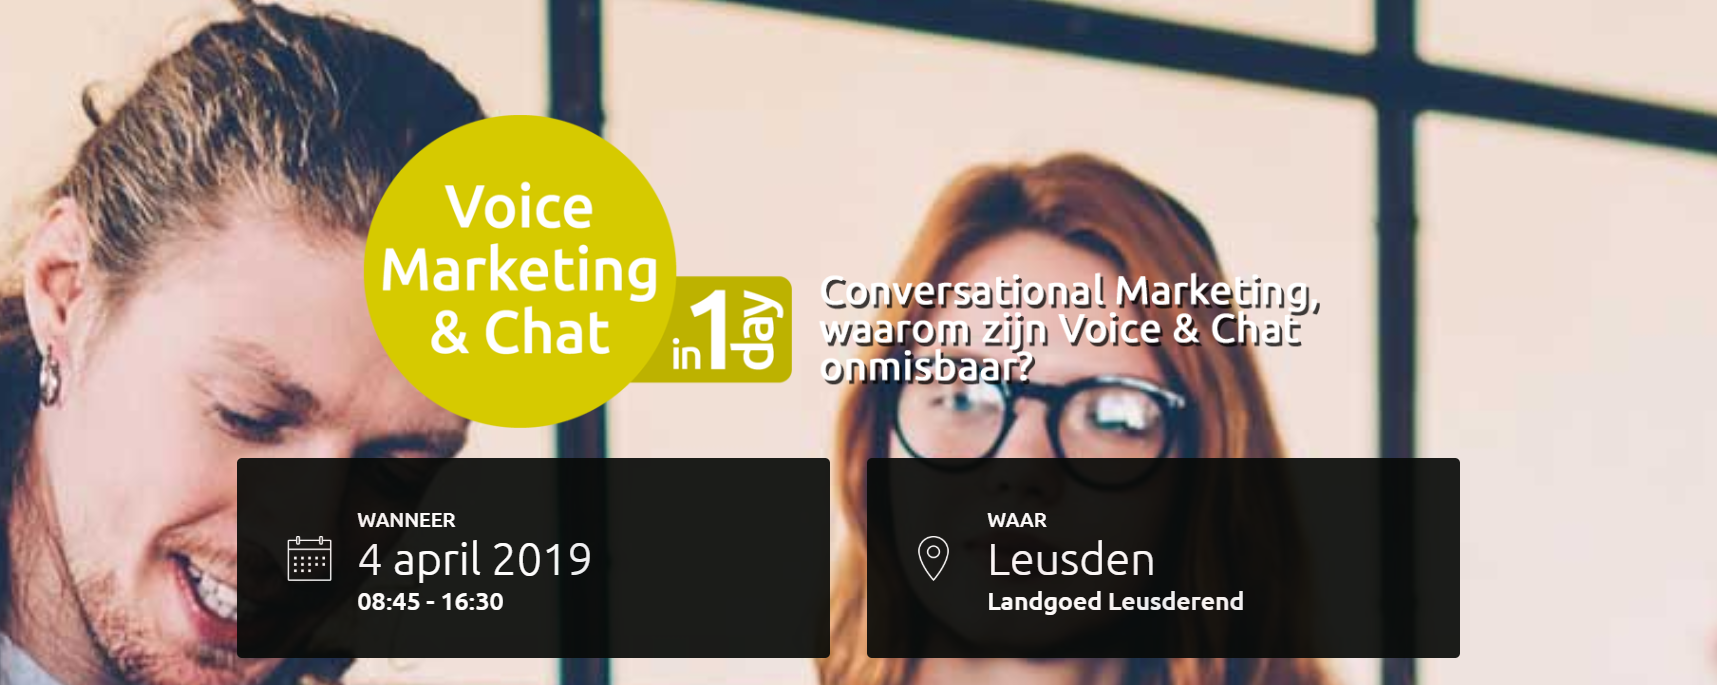 Voice Marketing & Chat in One Day 2019